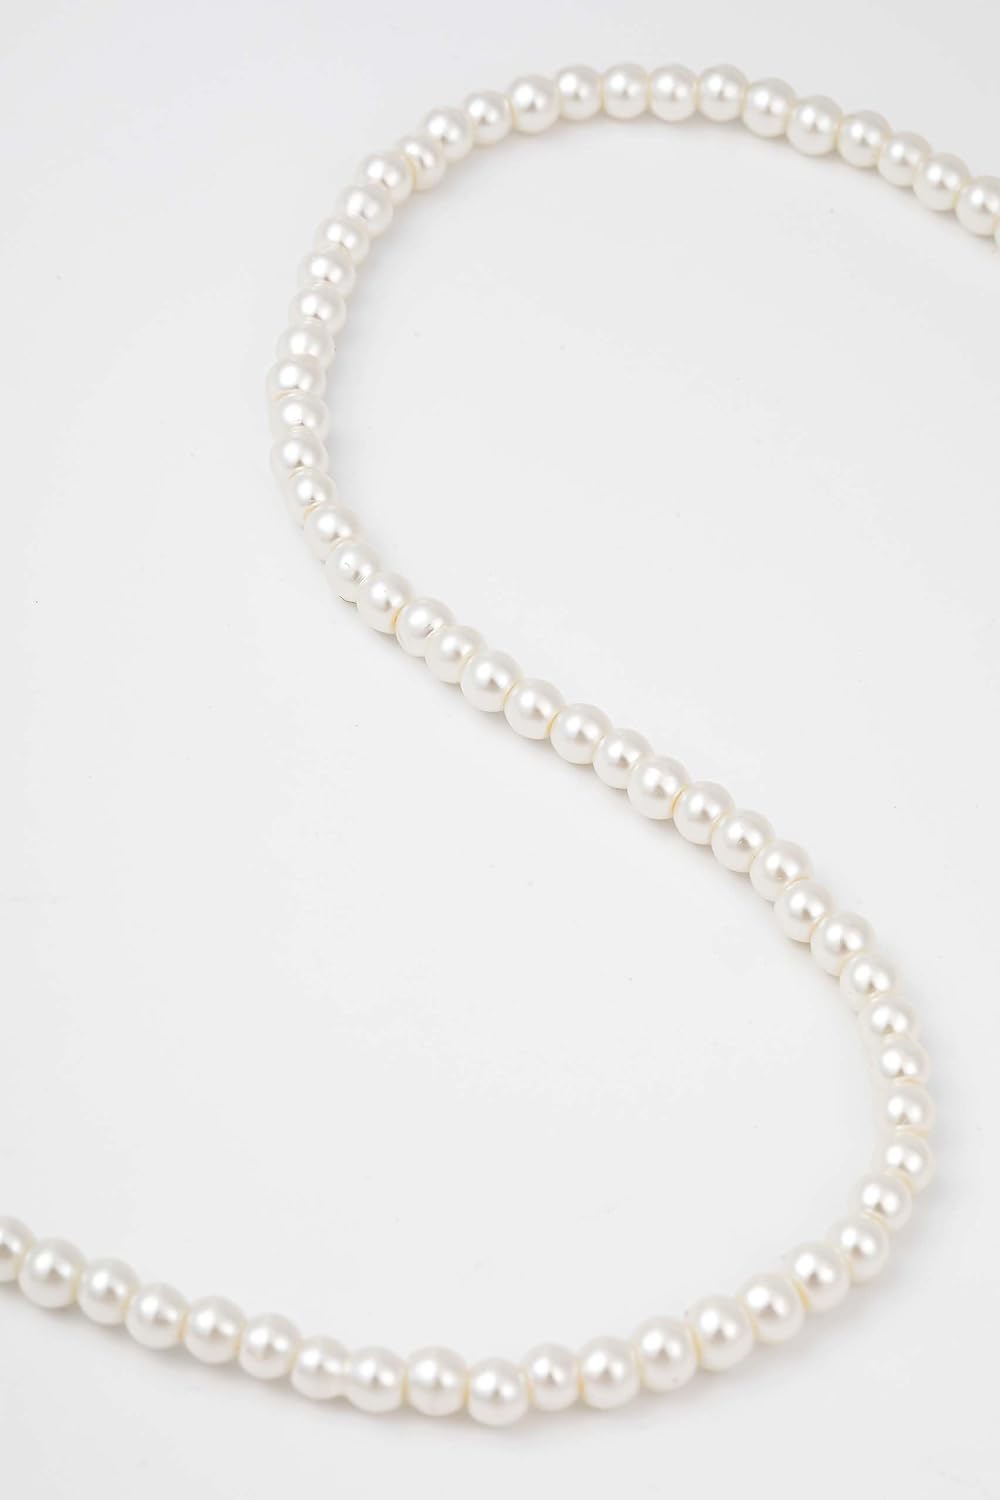 BABEYOND Round Imitation Pearl Necklace Wedding Pearl Necklace for Brides